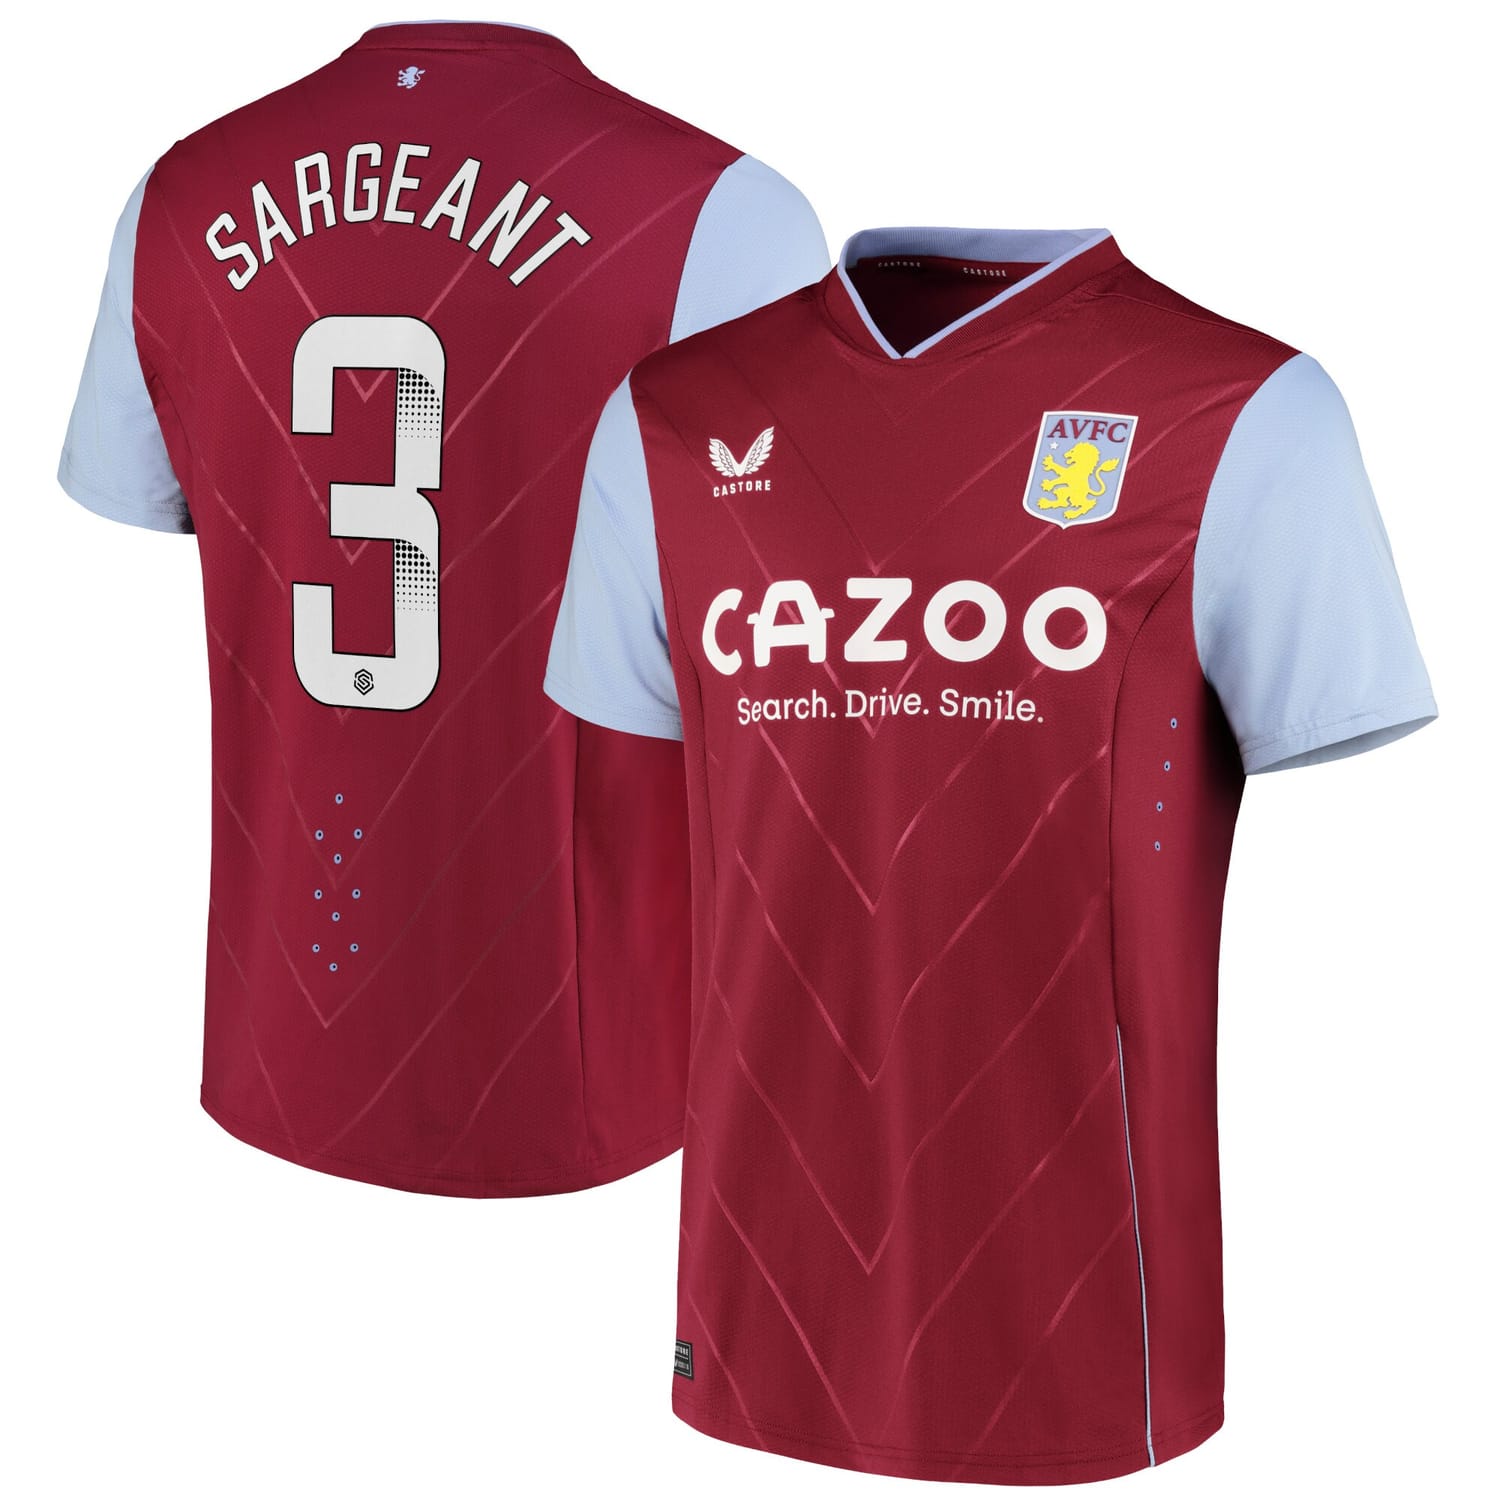 Premier League Aston Villa Home WSL Pro Jersey Shirt 2022-23 player Meaghan Sargeant 3 printing for Men